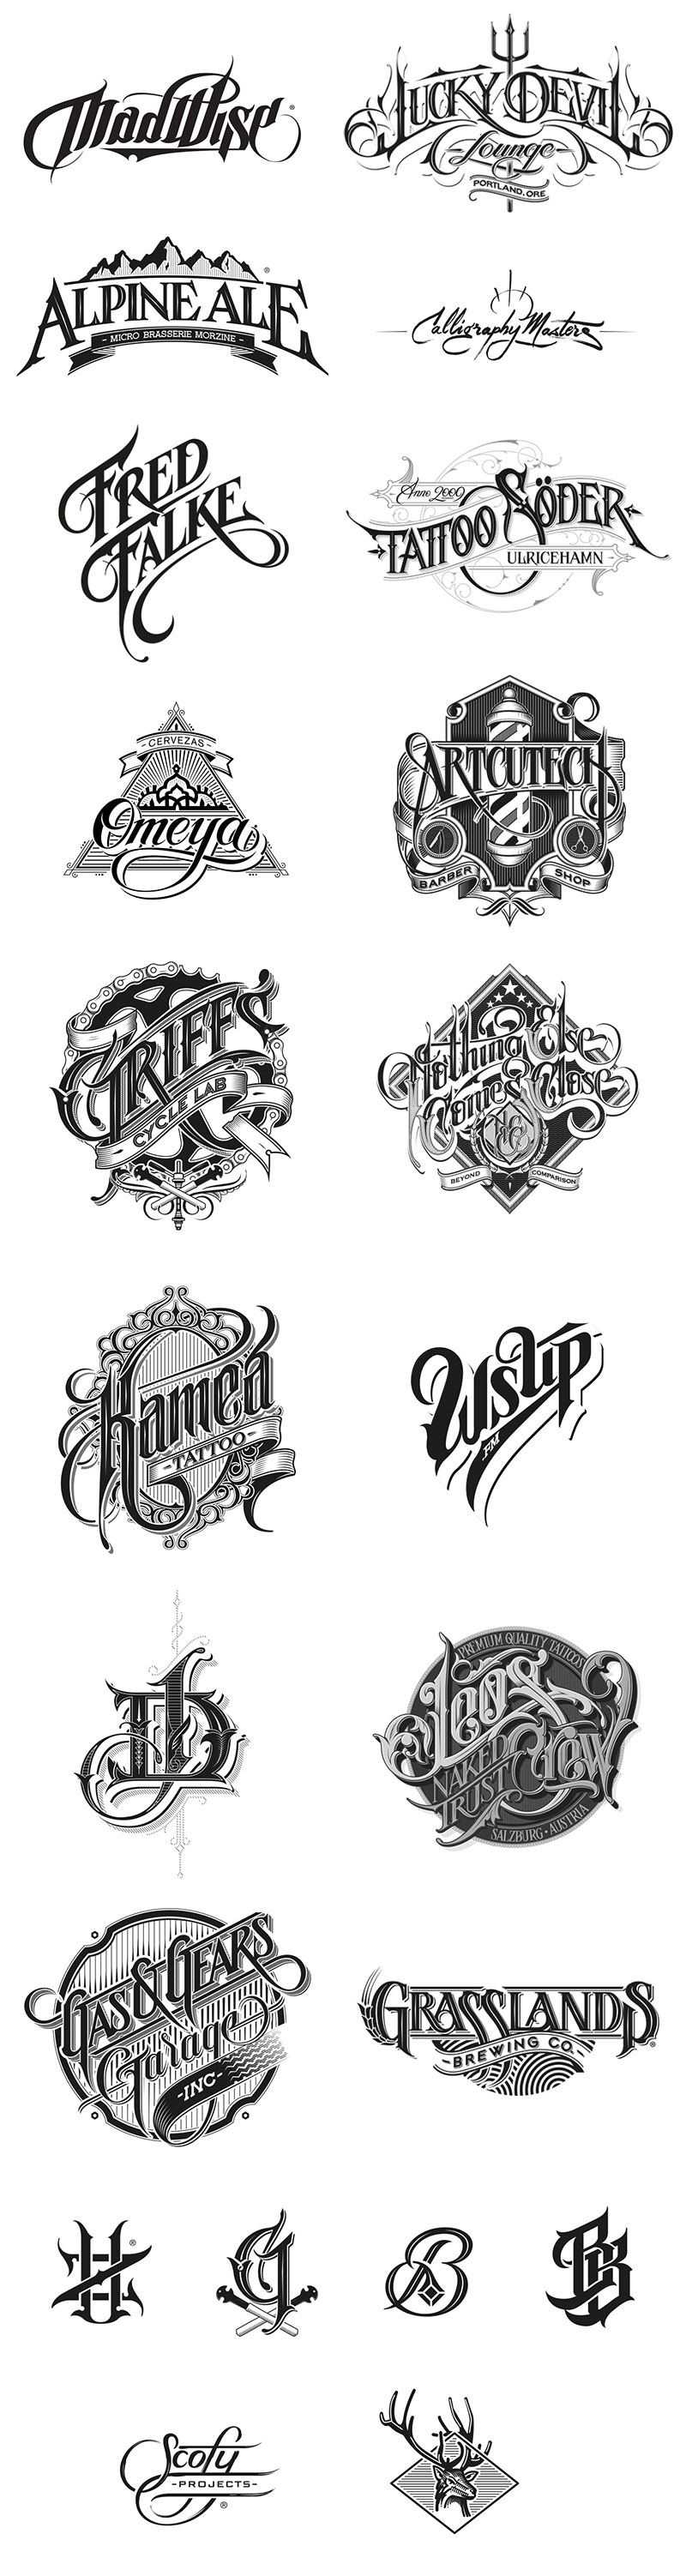 Logotypes, marks, and custom letterings by Martin Schmetzer, a Stockholm based artist and graphic designer with main focus on hand-drawn typography.